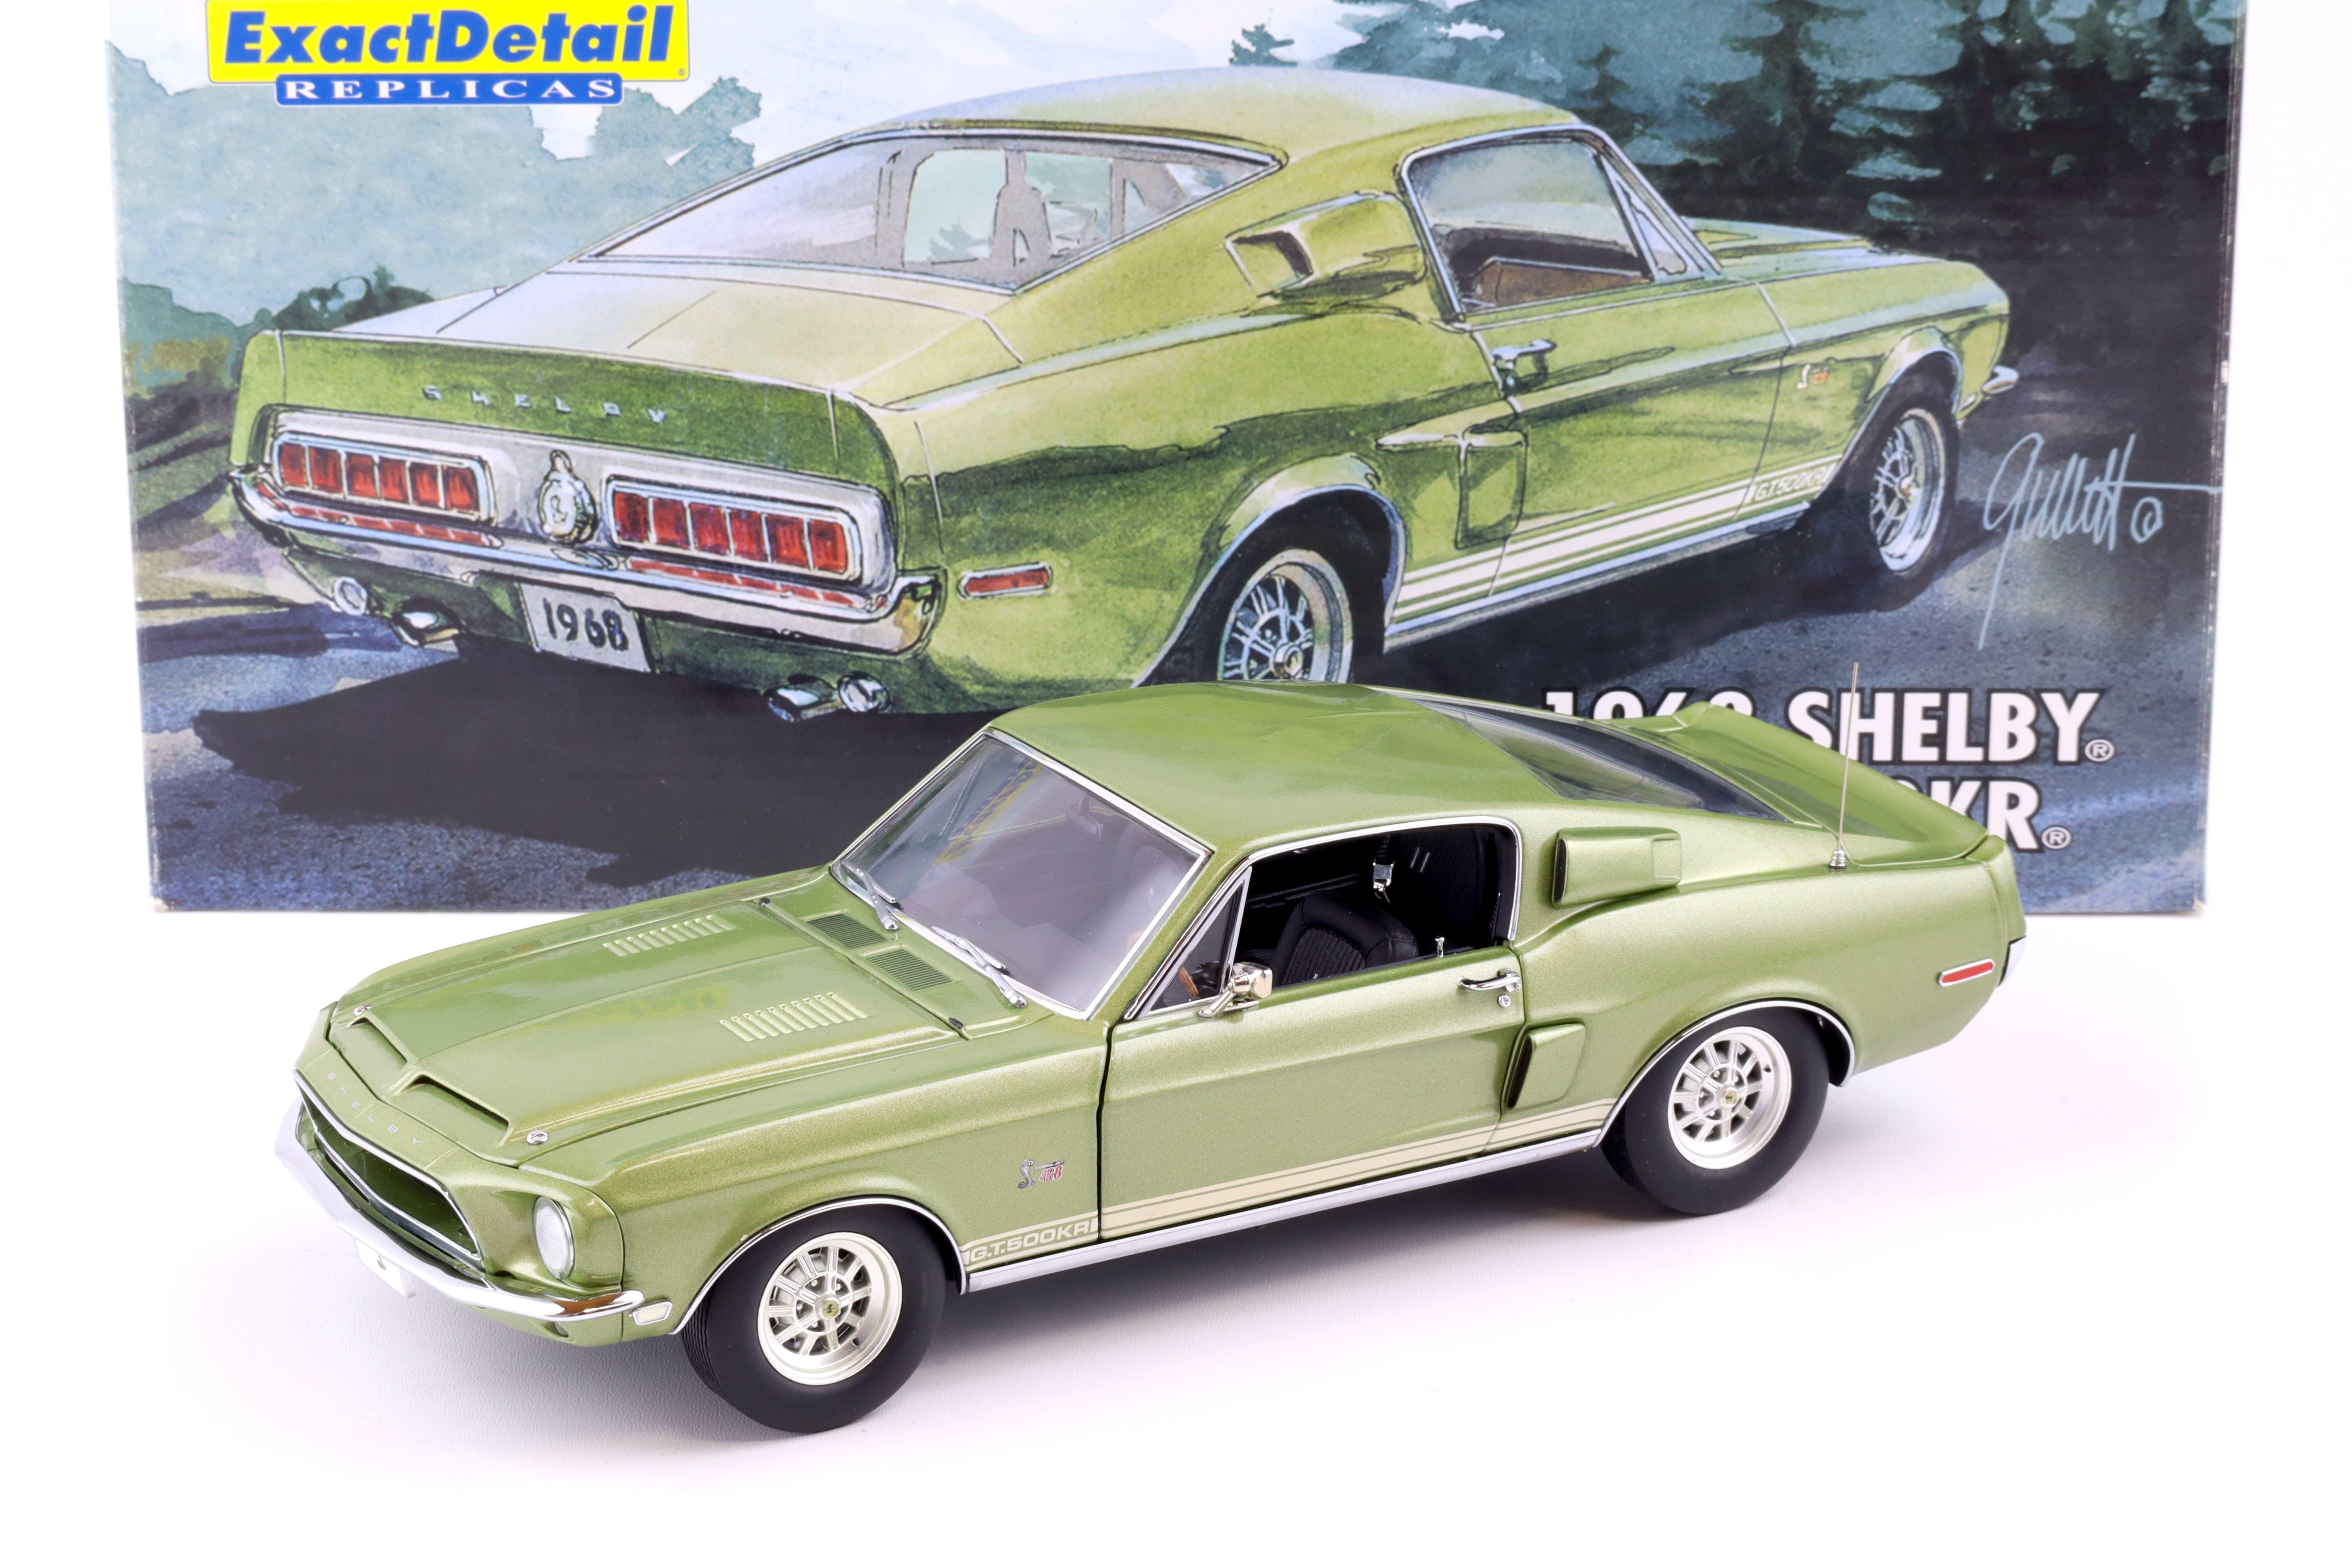 1:18 Exact Detail 1968 Shelby GT 500KR Coupe green metallic WCC709